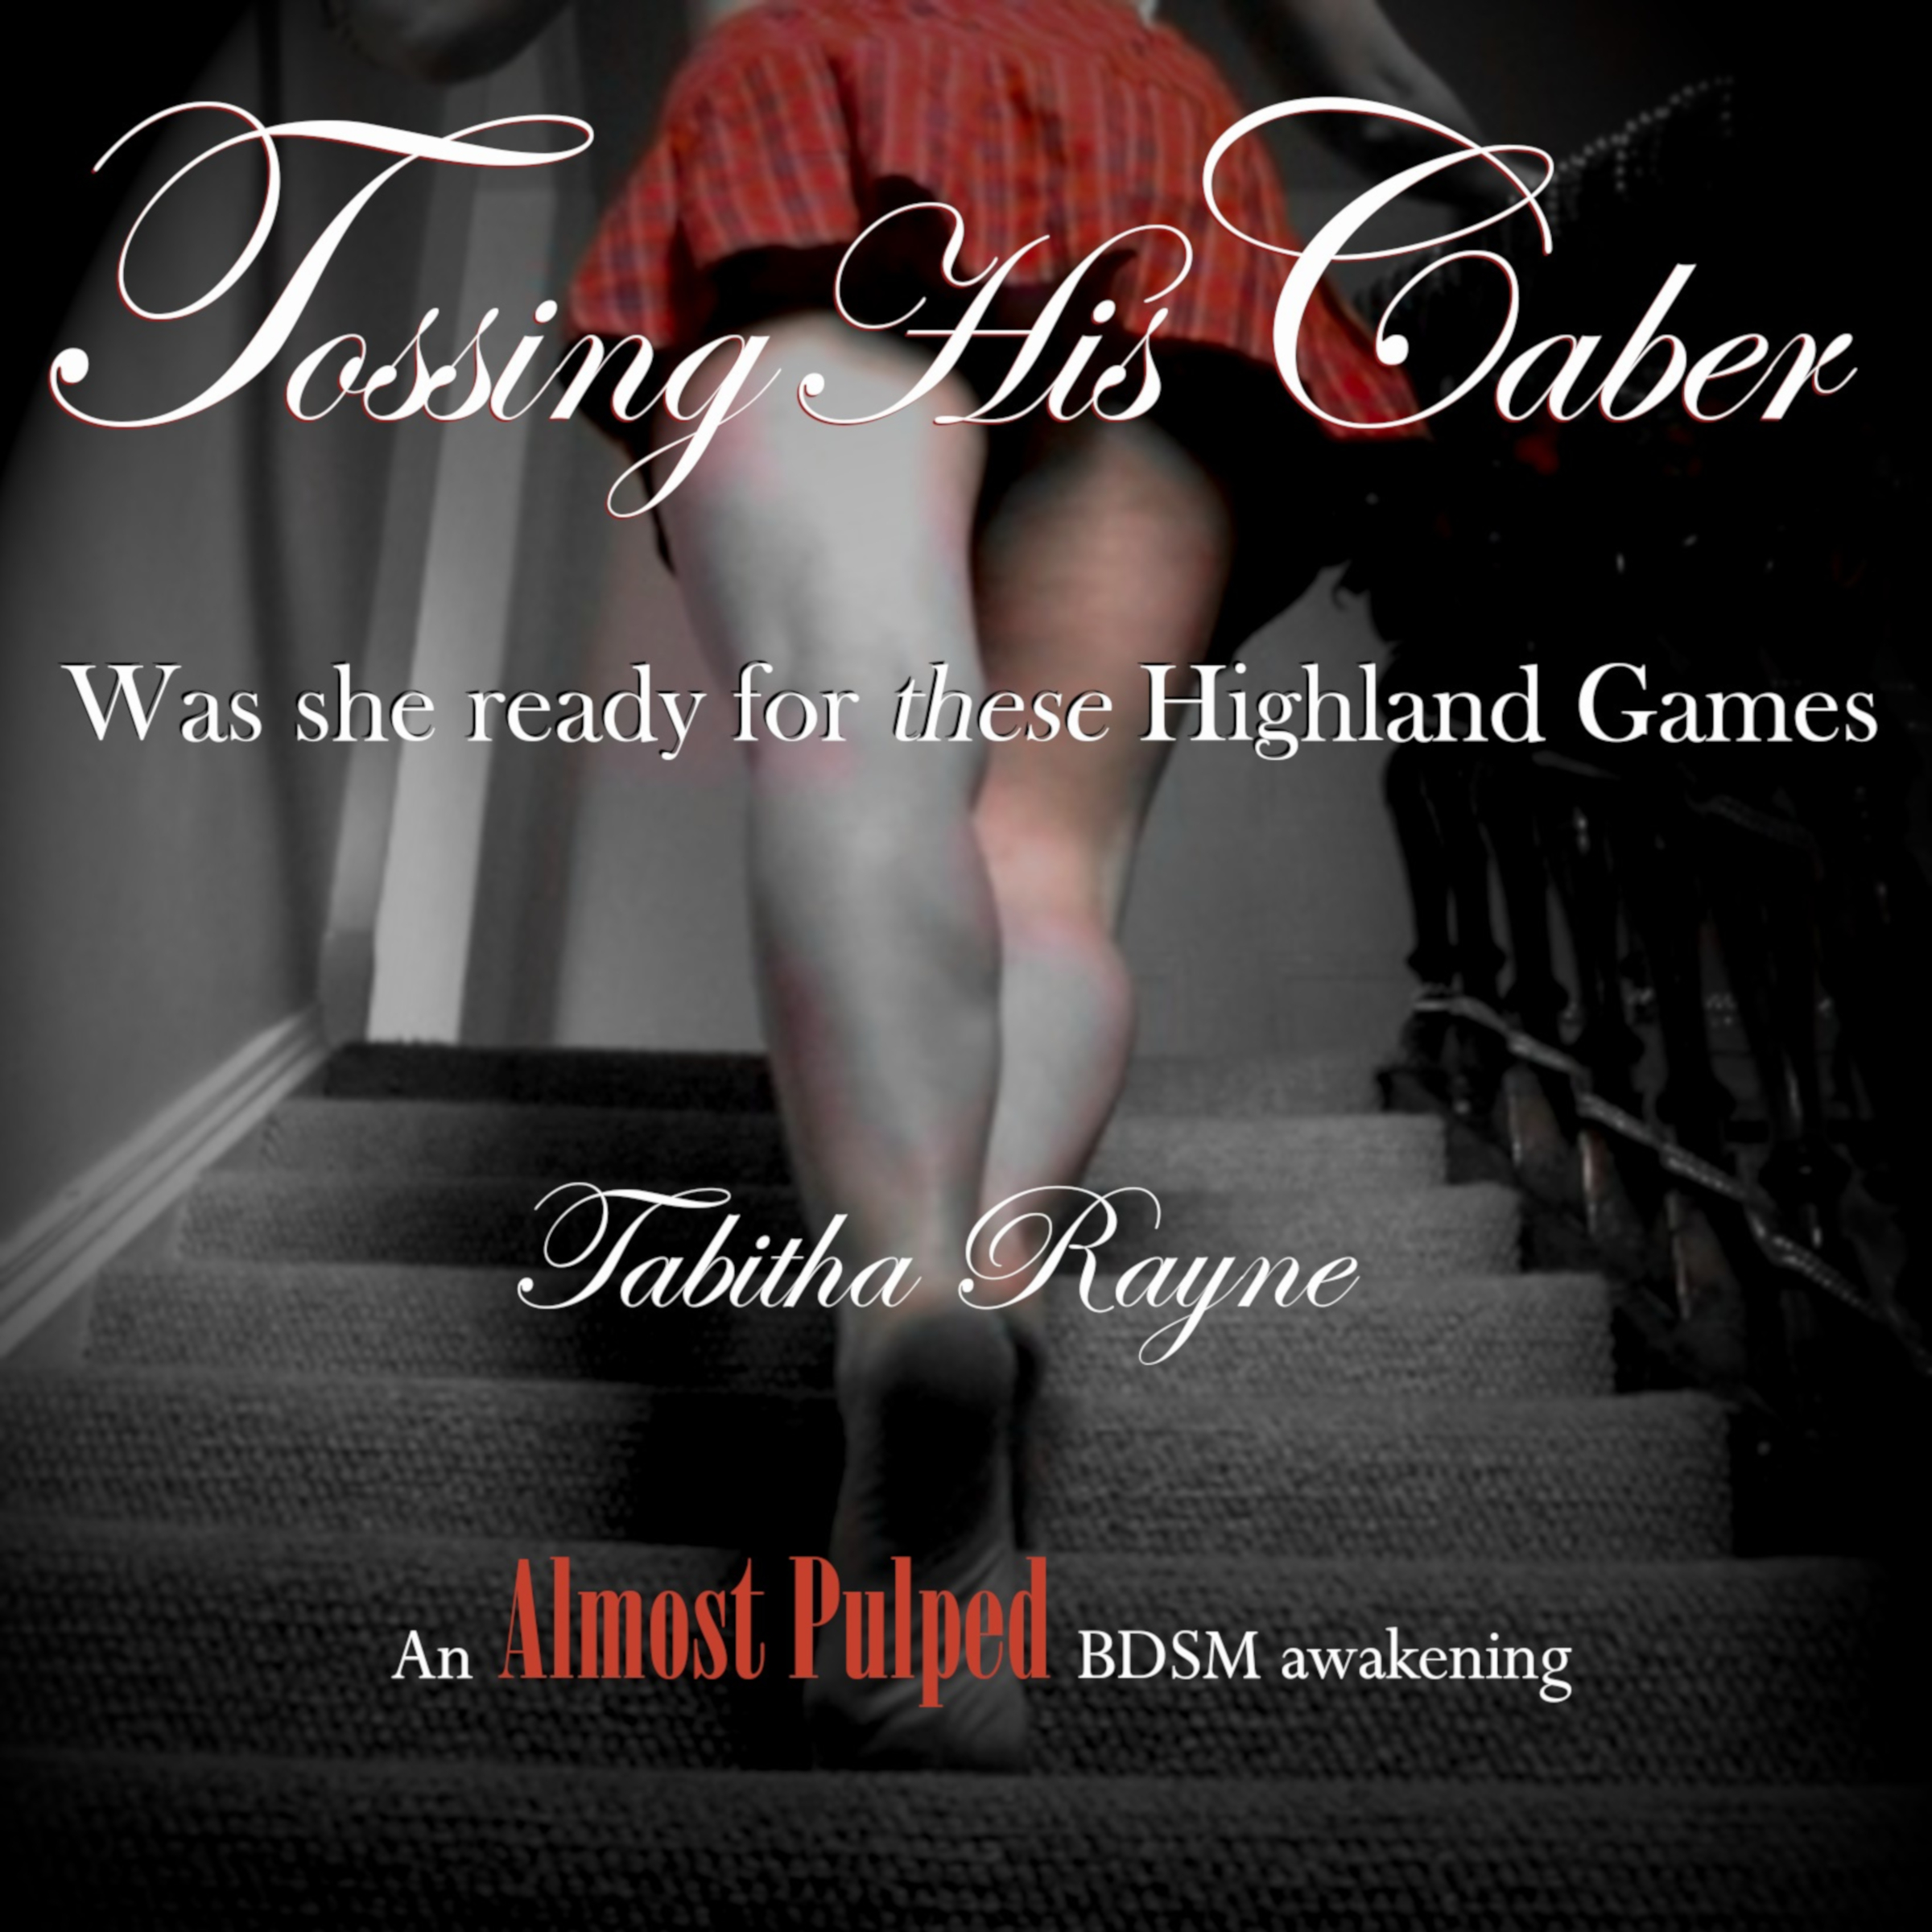 female legs climbing stairs with a short red kilt with text: Tossing His Caber, Was she ready for these Highland Games? By Tabitha Rayne sexy Highlander audiobook cover